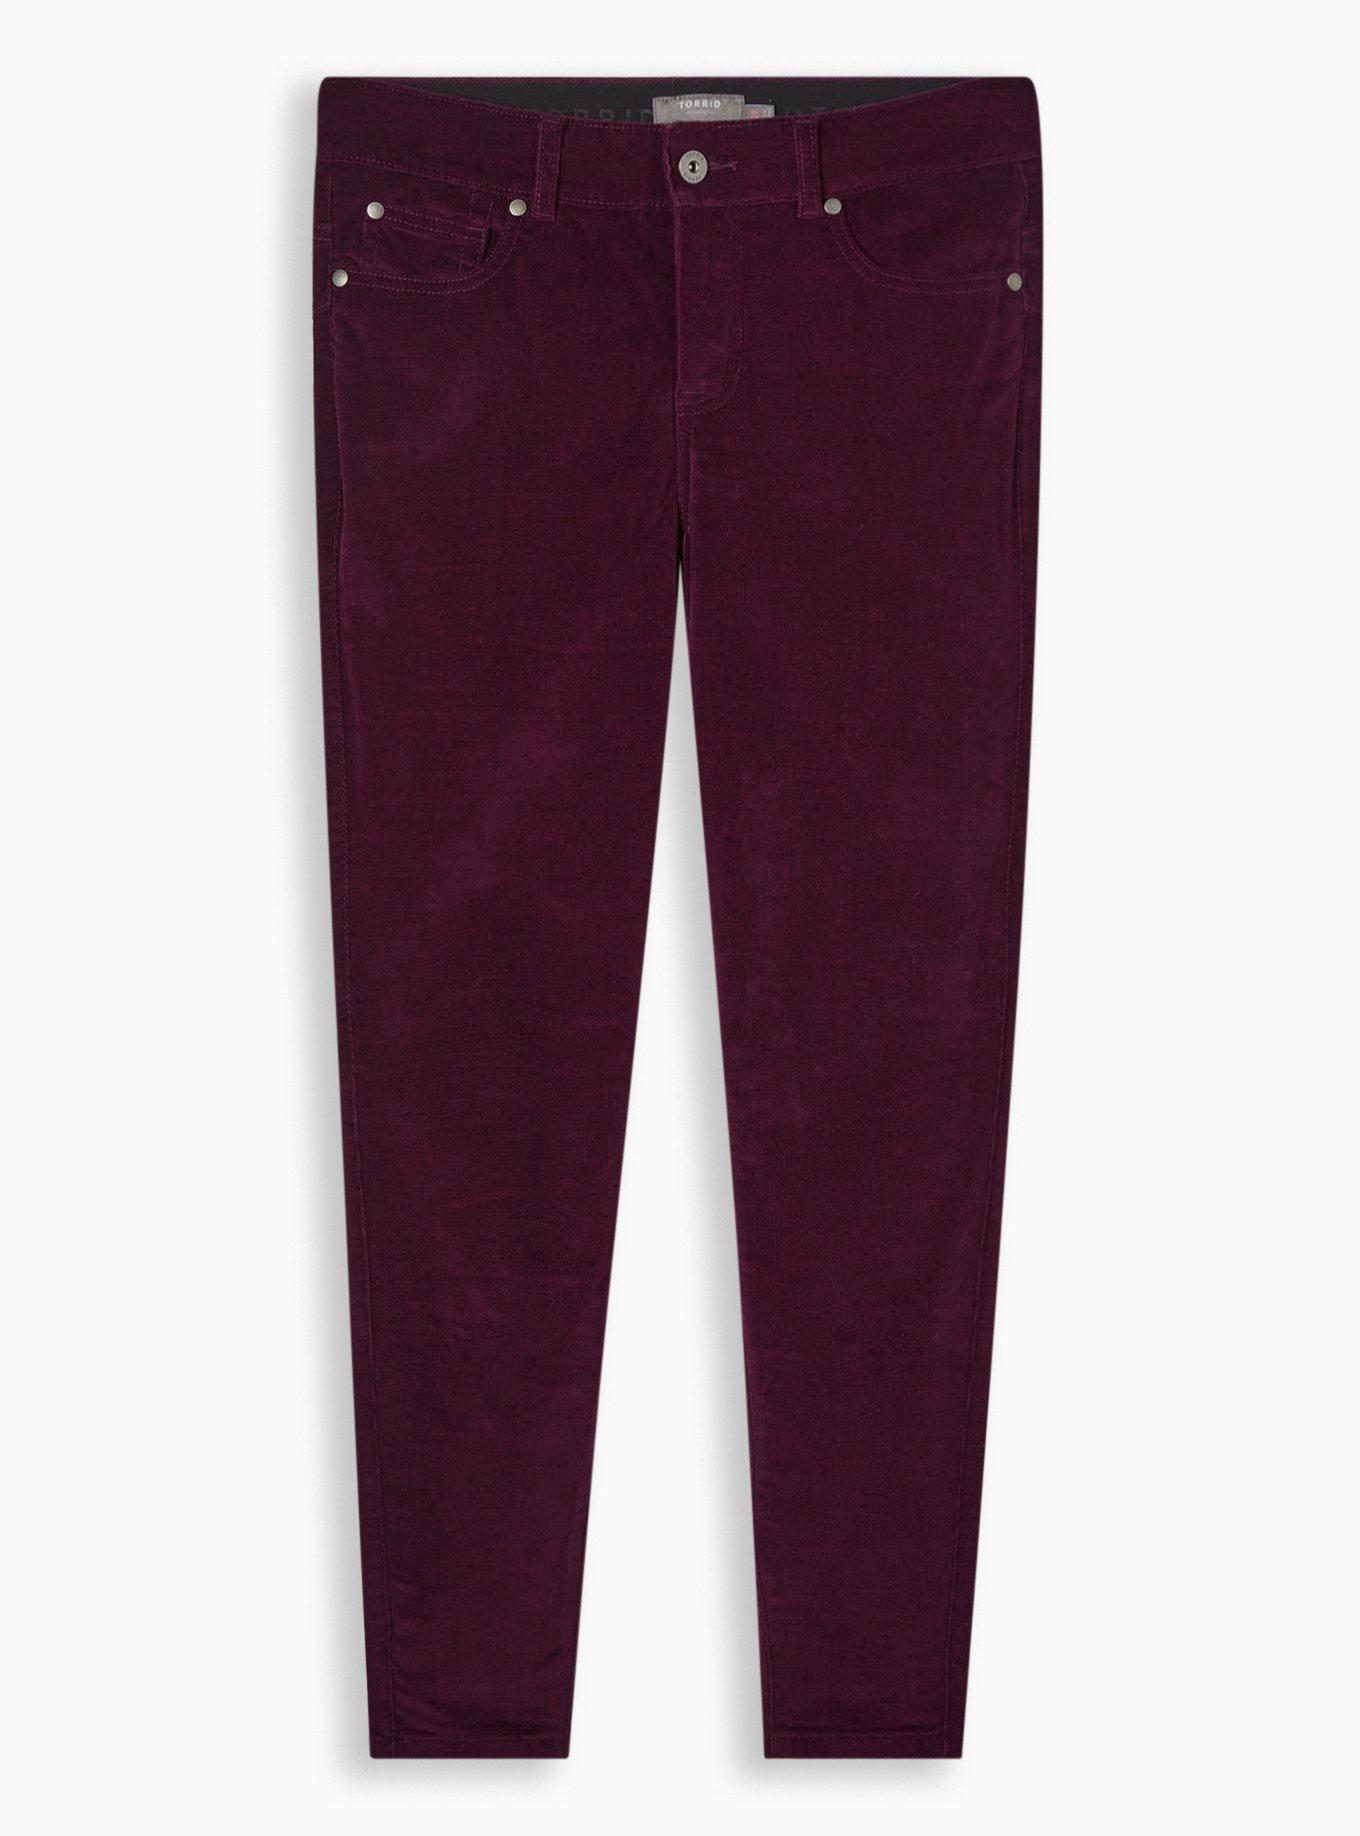 Columbia Women's Anytime Casual Ankle Pant Burgundy Sz L